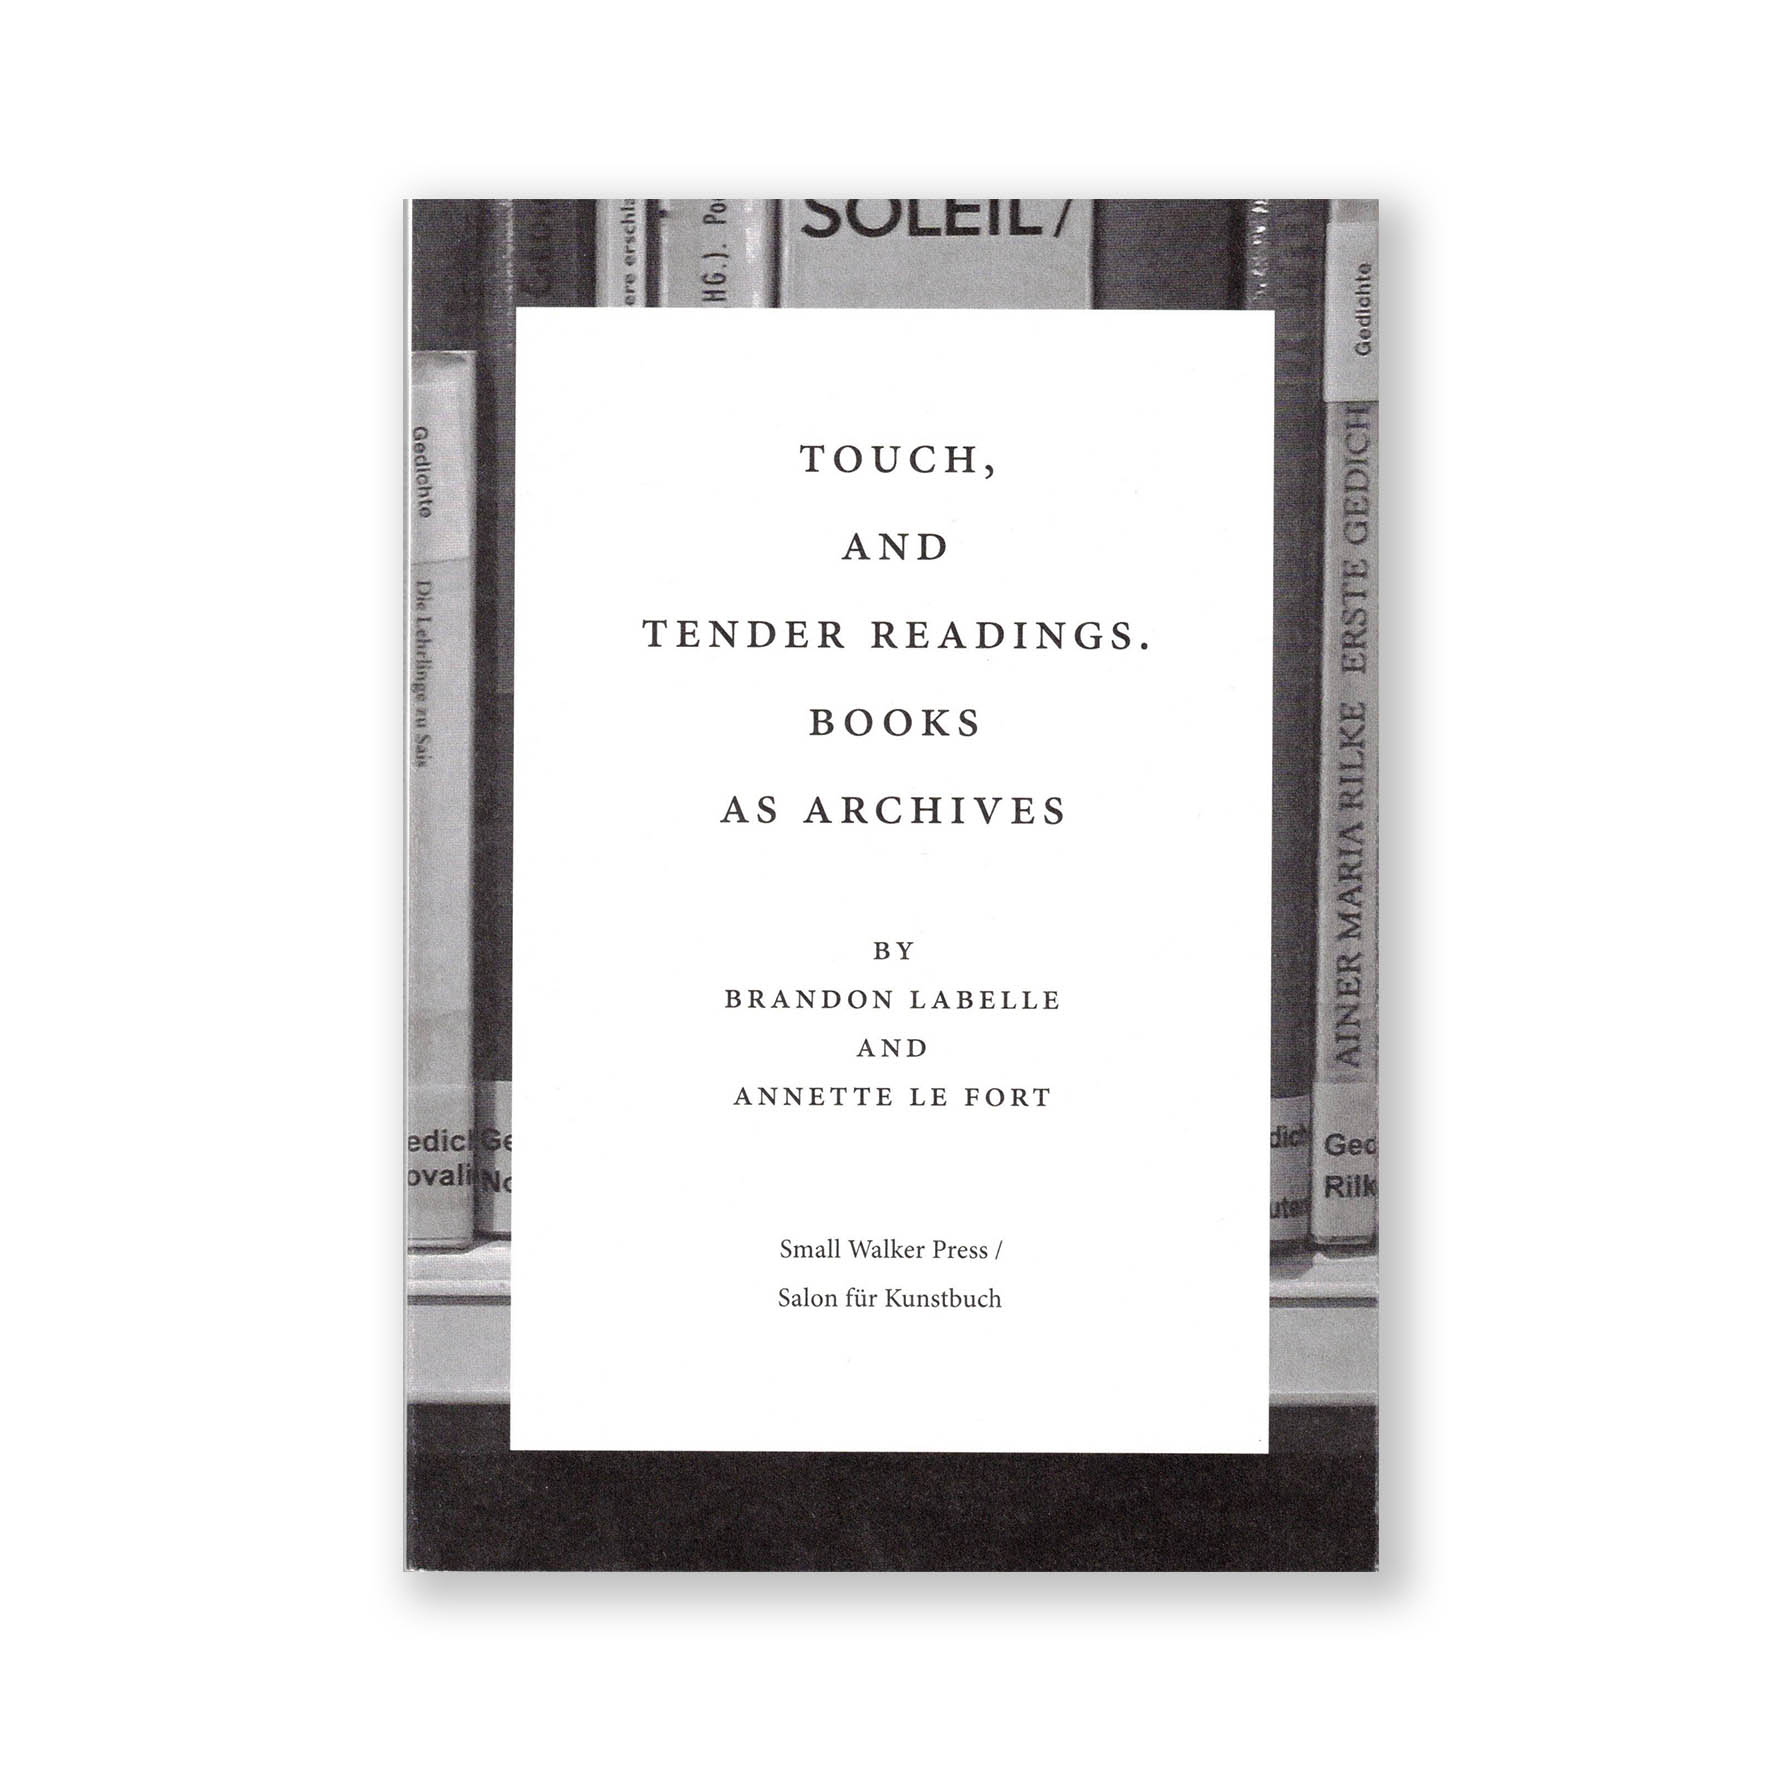 Touch, and Tender Readings